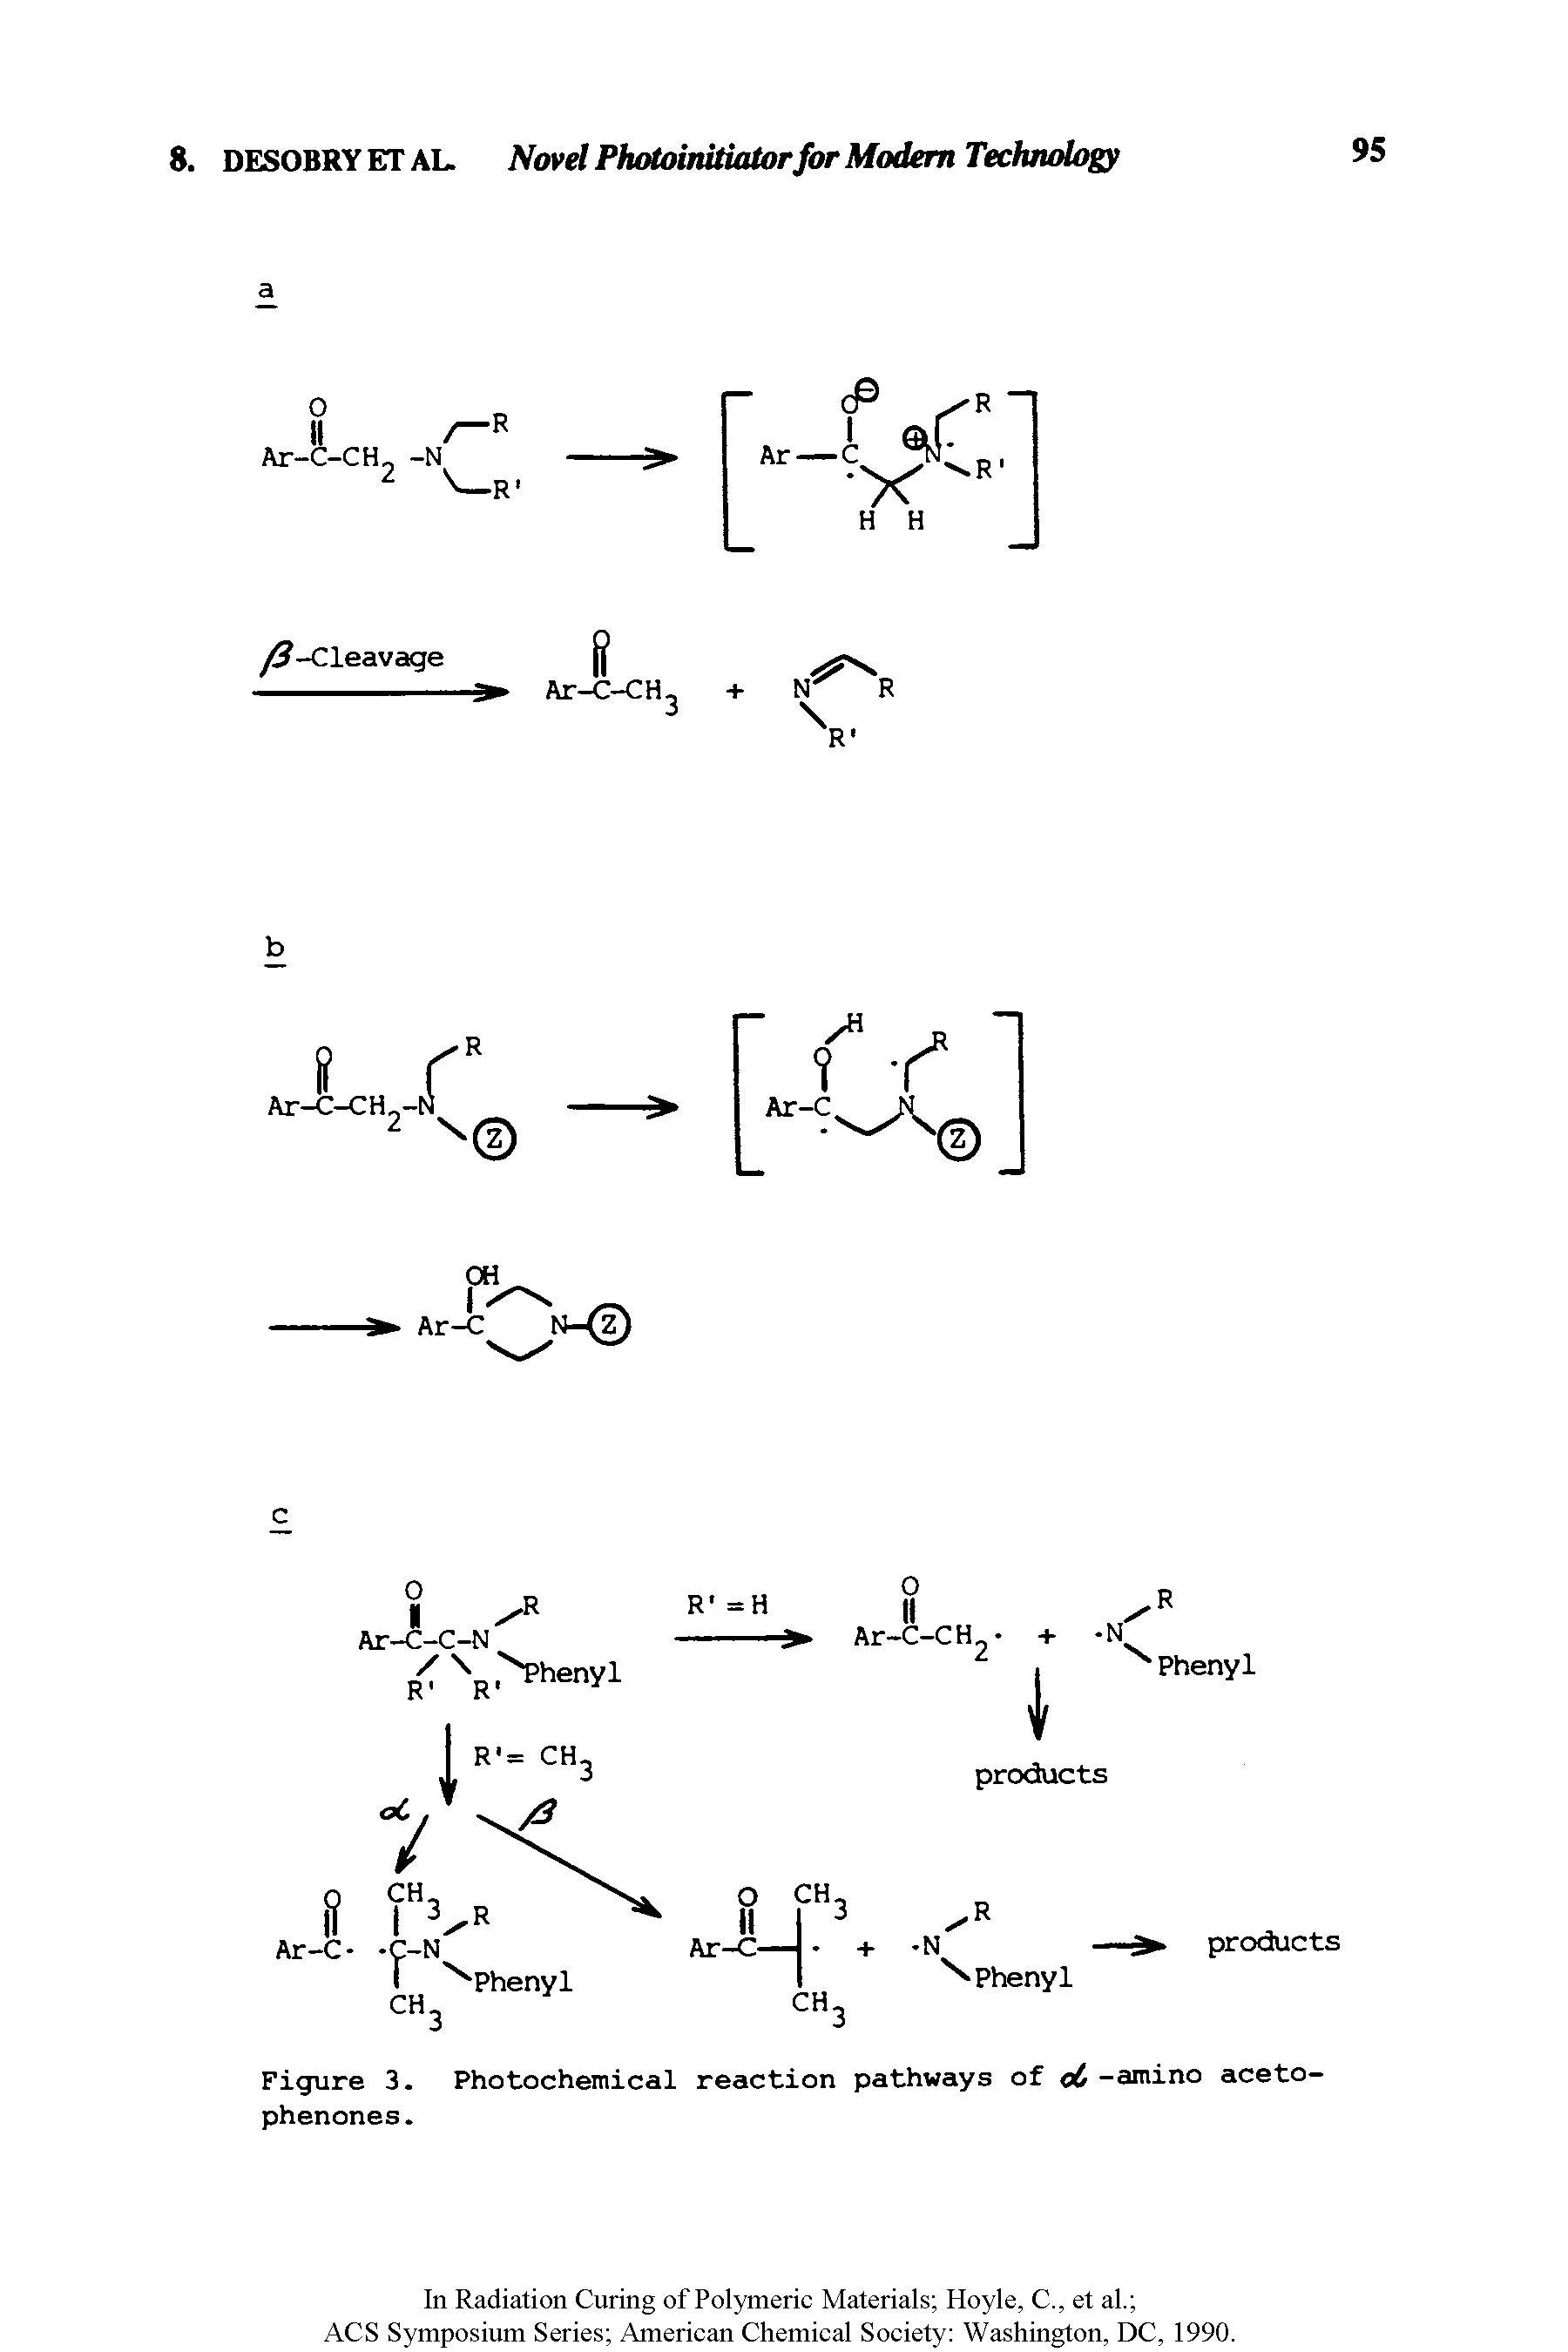 Figure 3. Photochemical reaction pathways of oC -amino acetophenones.